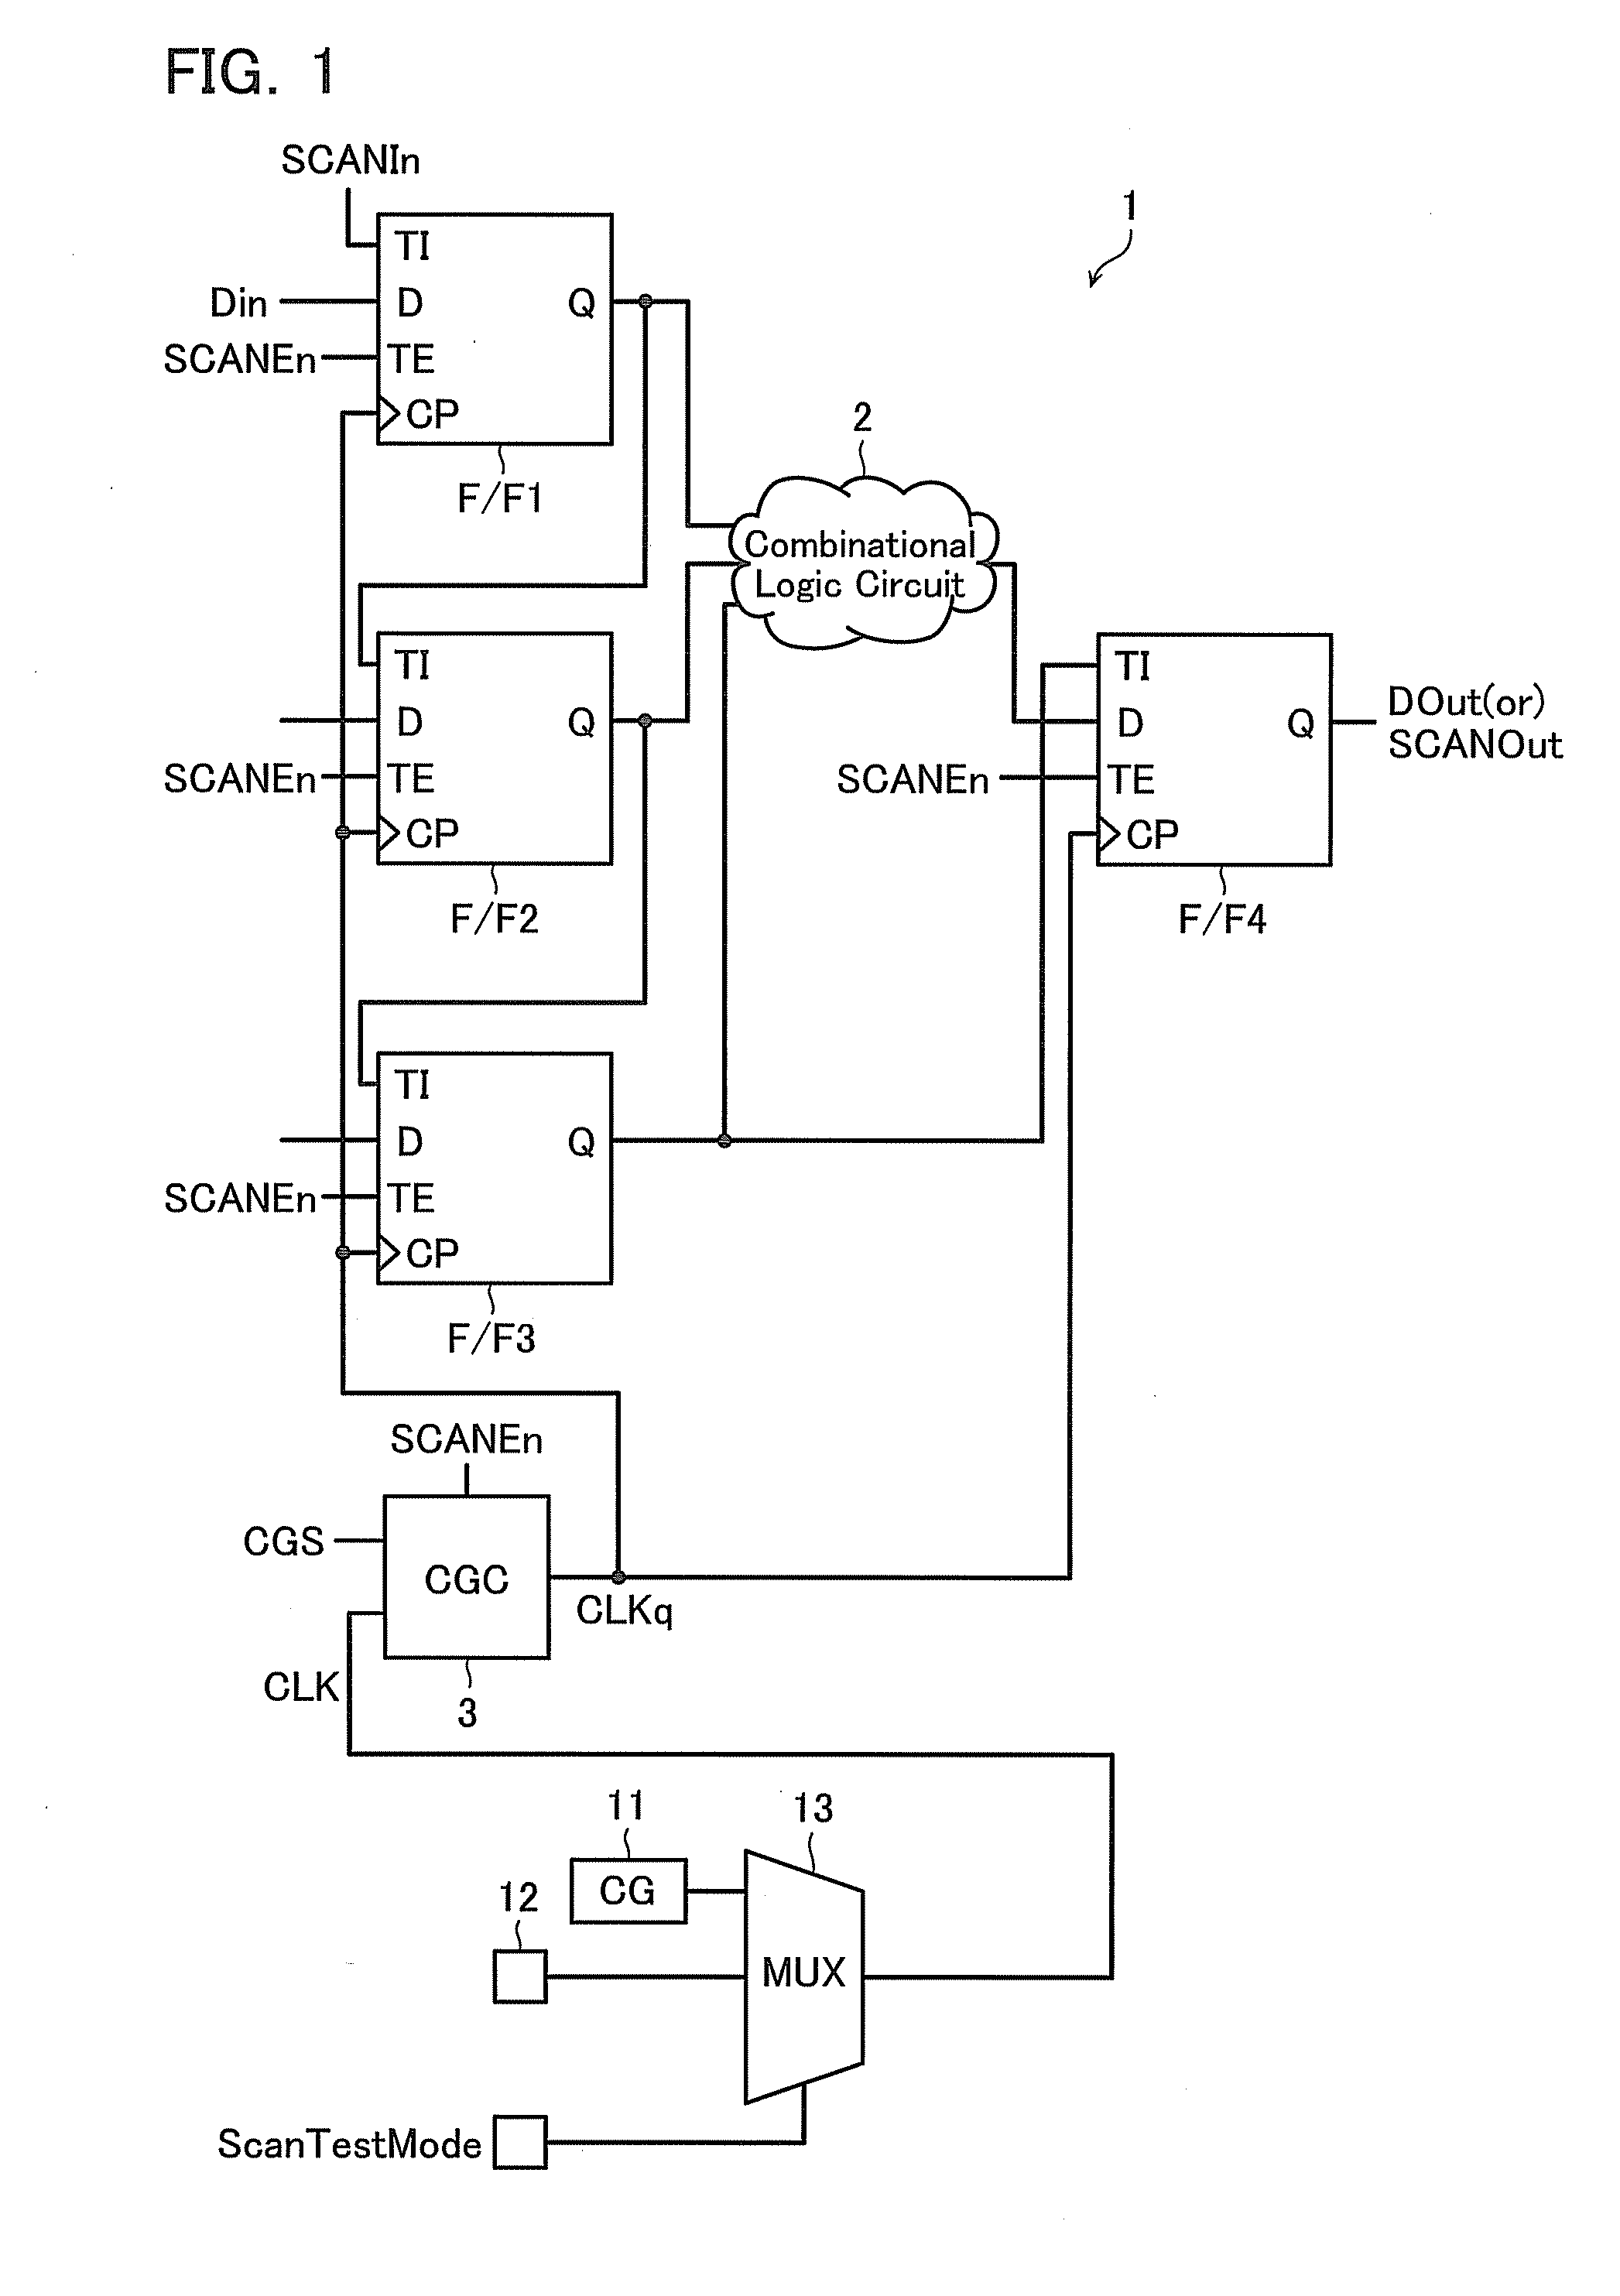 Semiconductor integrated circuit and design automation system